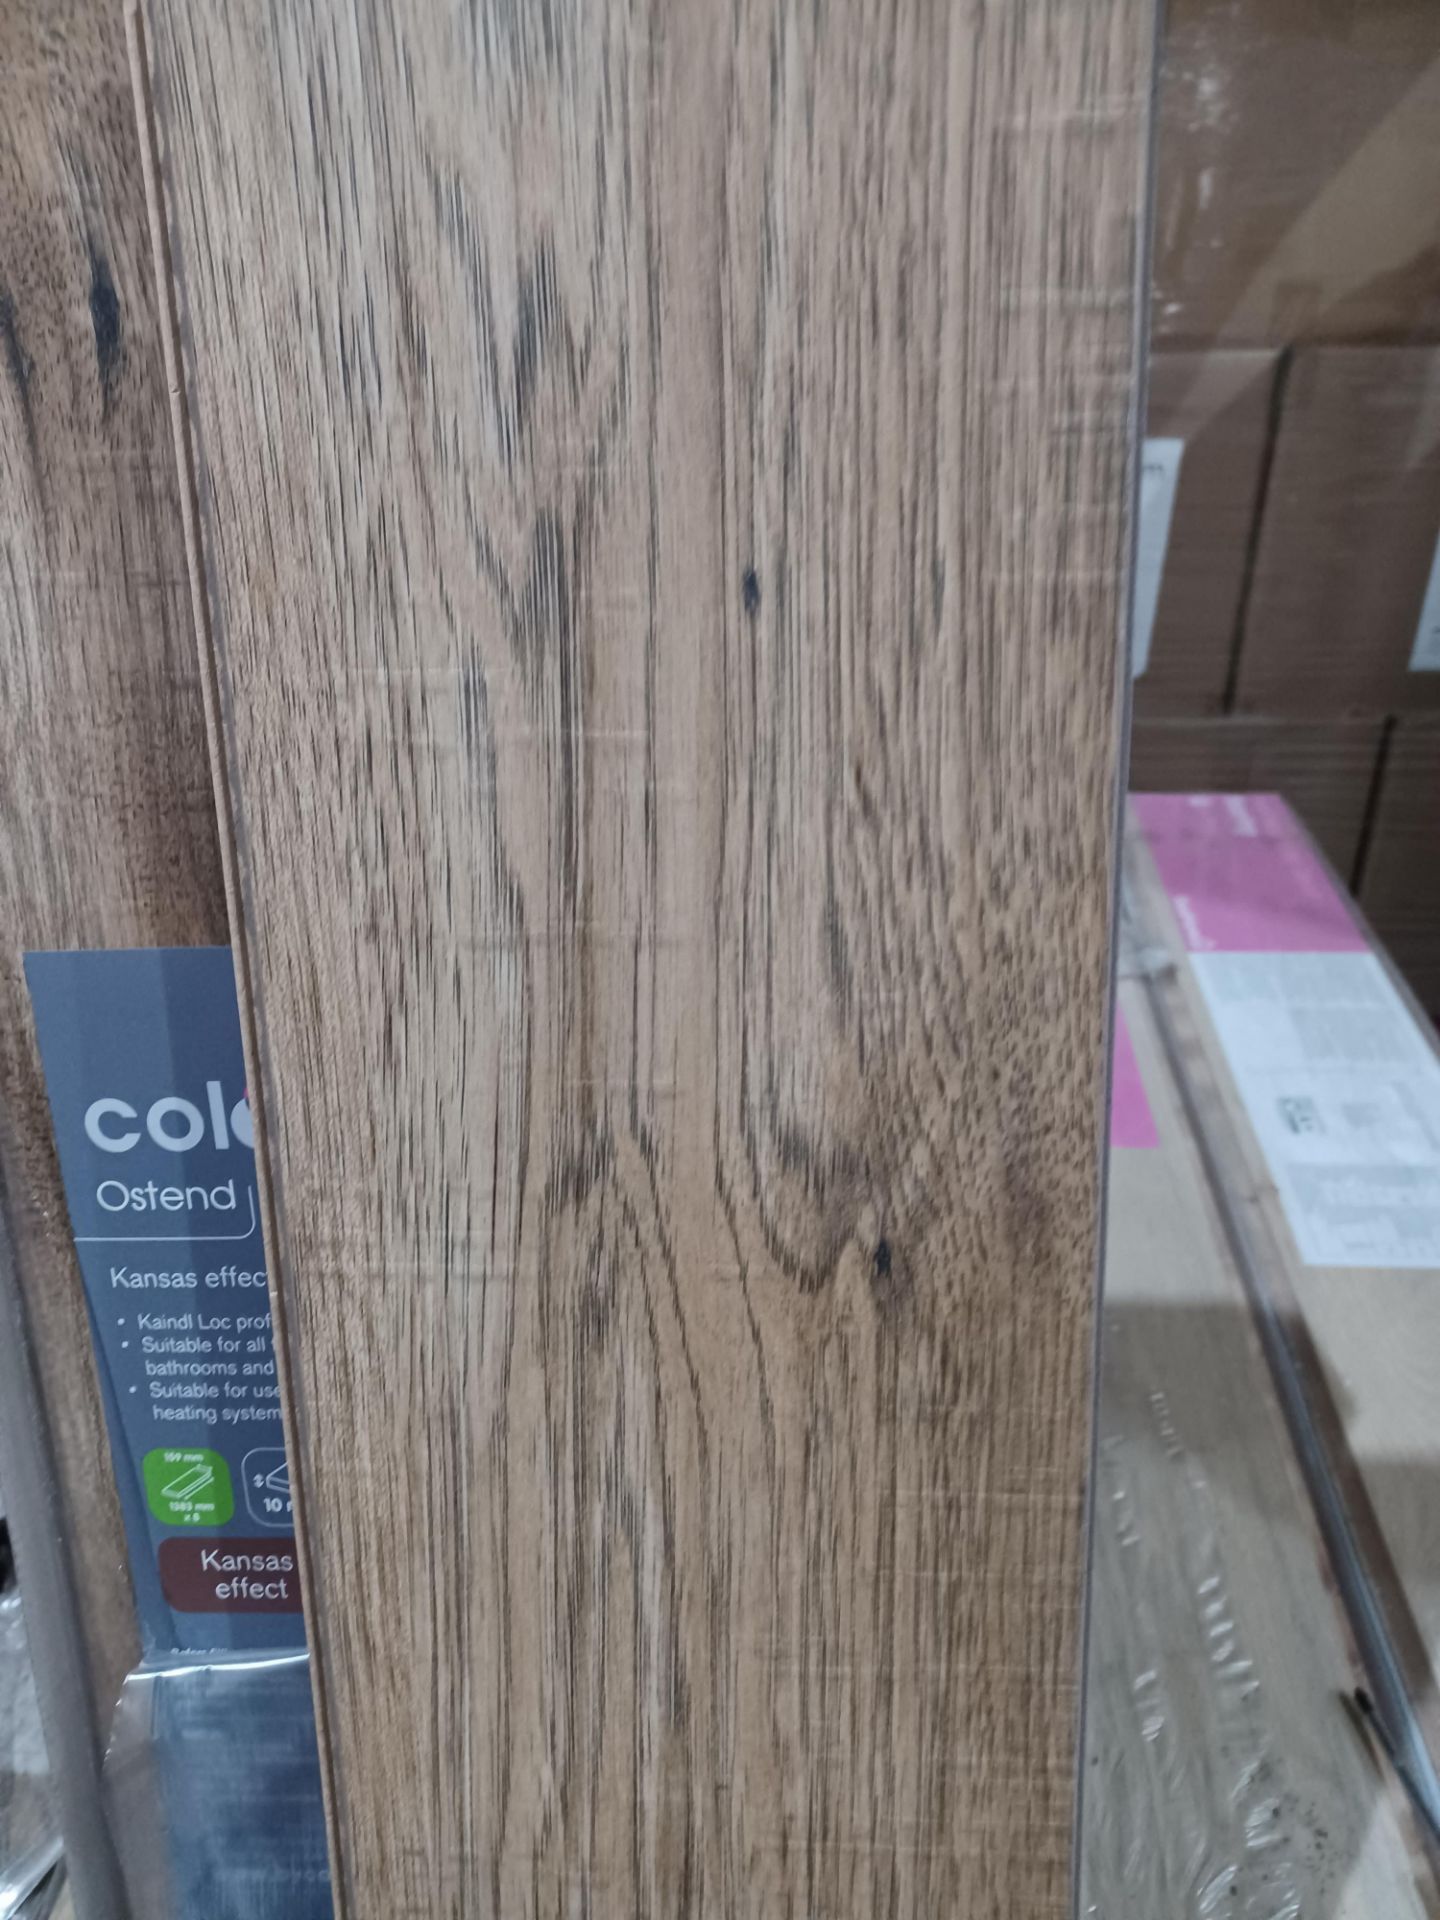 10 X PACKS OF Ostend Natural Oxford oak effect Flooring. EACH PACK CONTAINS 1.76m2, GIVING THIS - Image 2 of 2